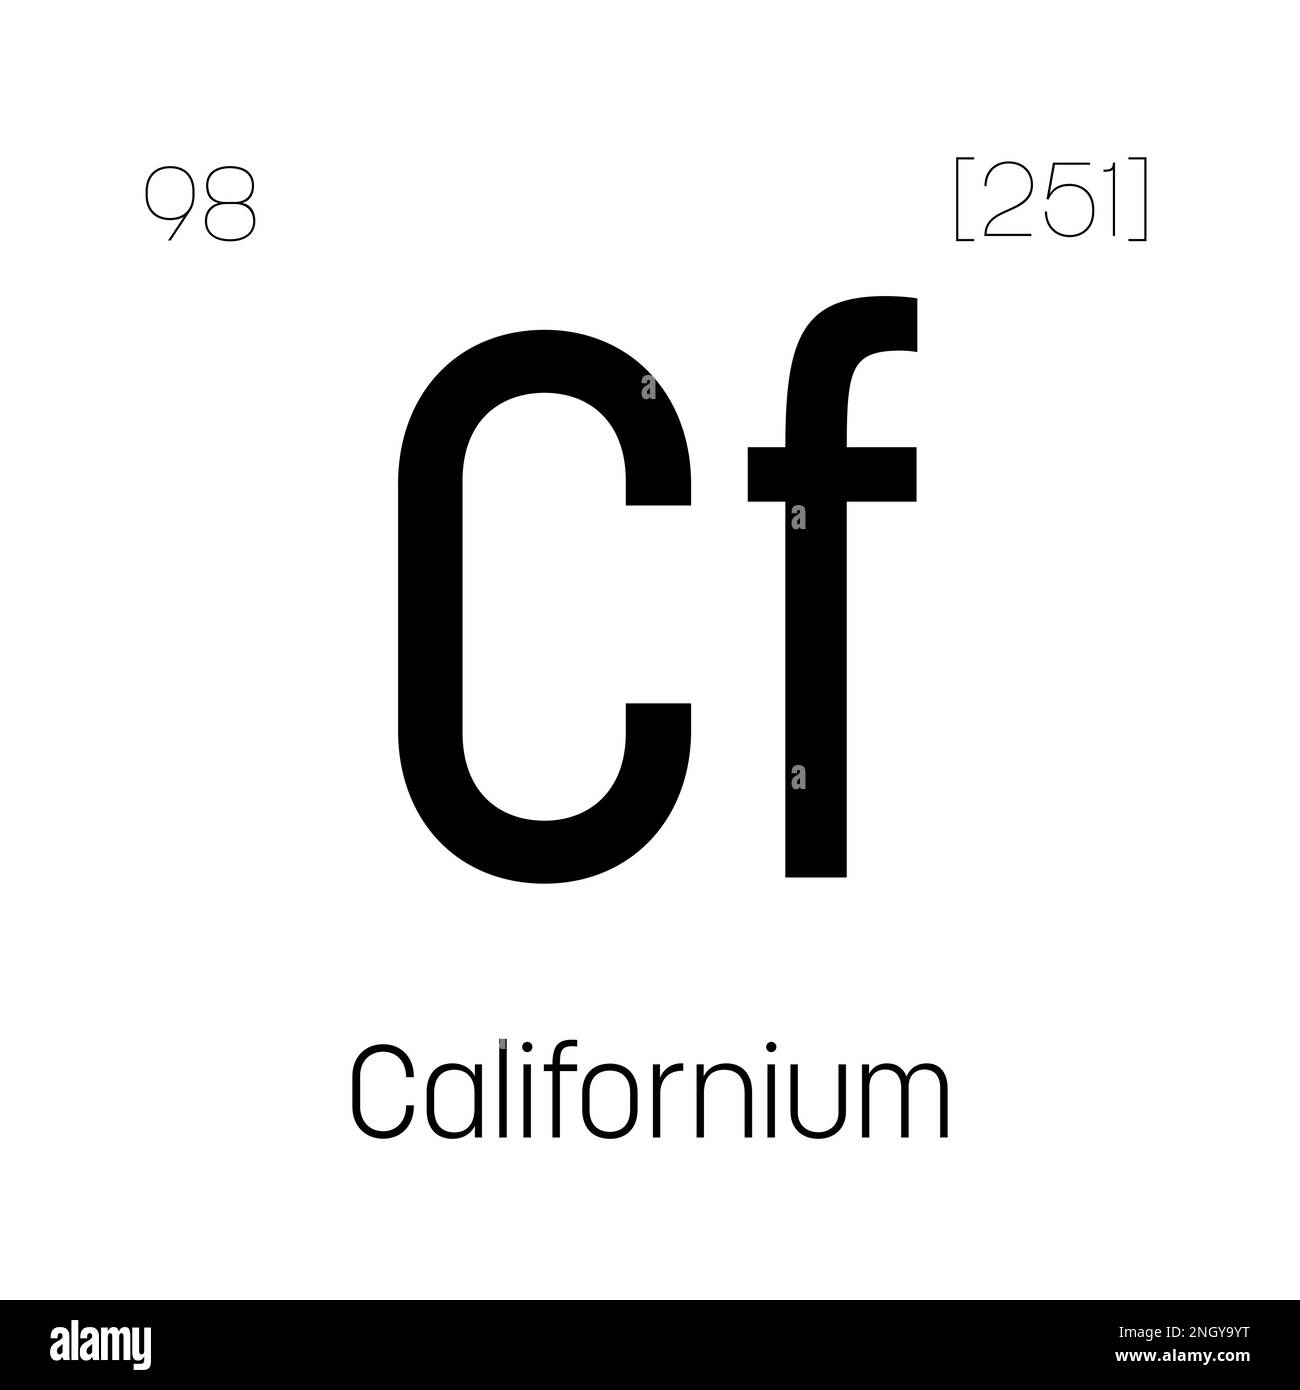 Californium, Cf, periodic table element with name, symbol, atomic number and weight. Synthetic radioactive element with potential uses in scientific research and nuclear power. Stock Vector